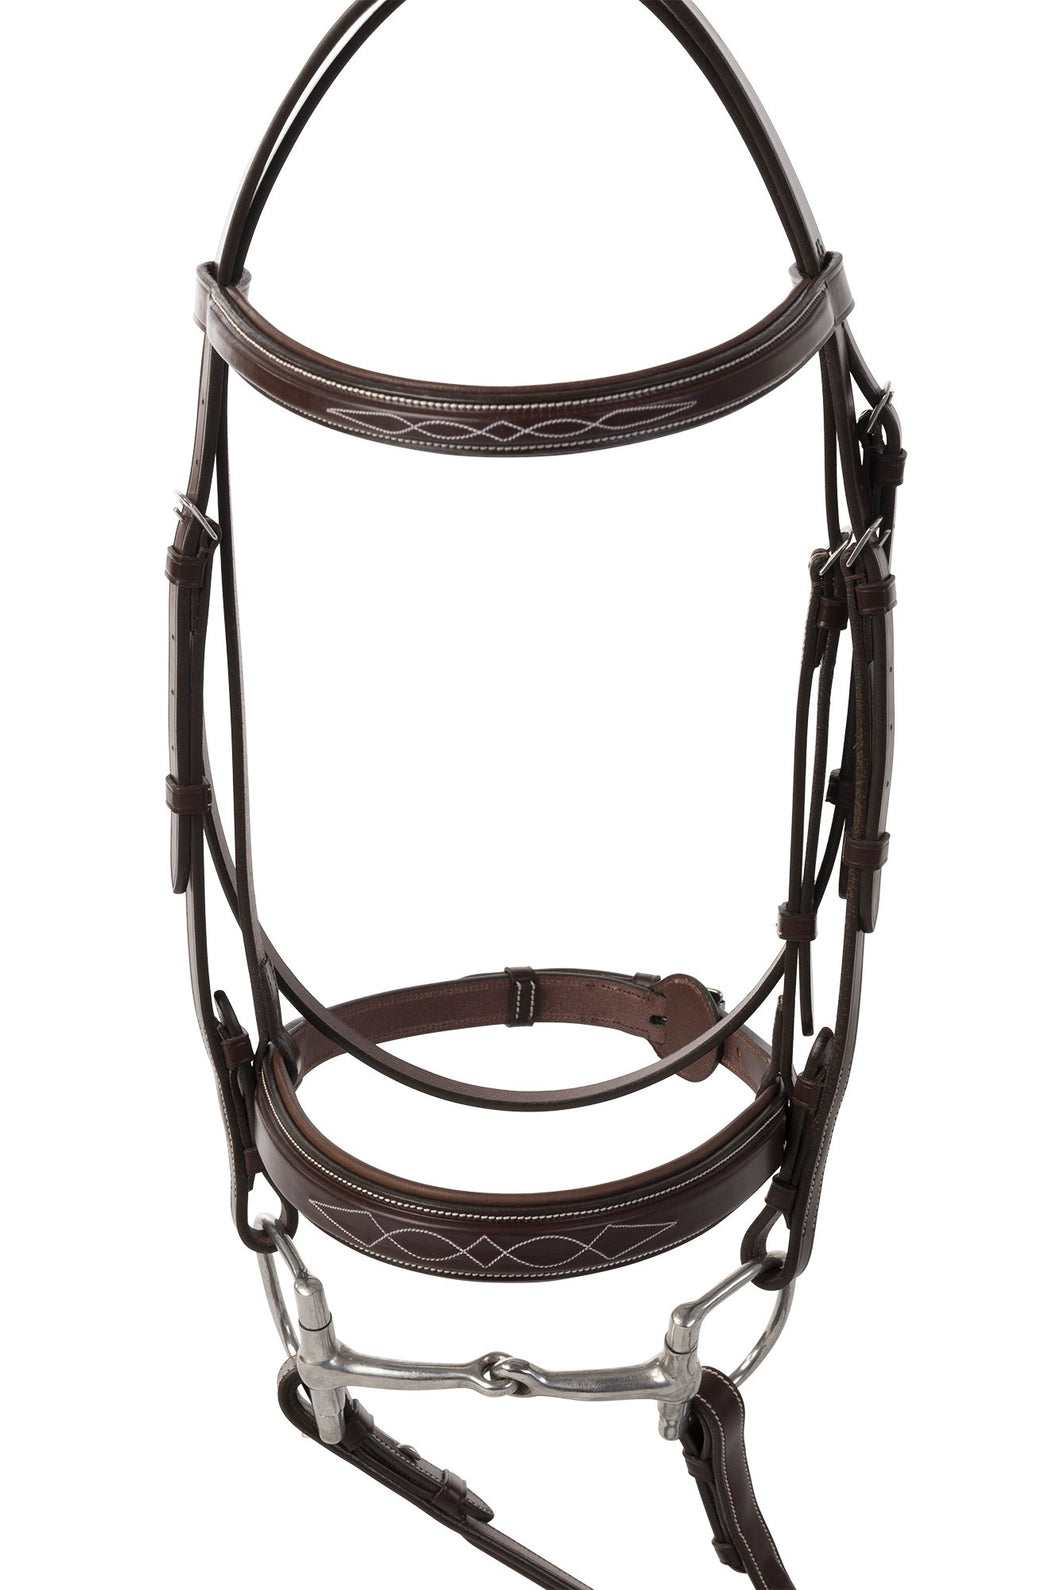 Huntley Fancy Stitched Leather Padded Hunter Bridle with Reins